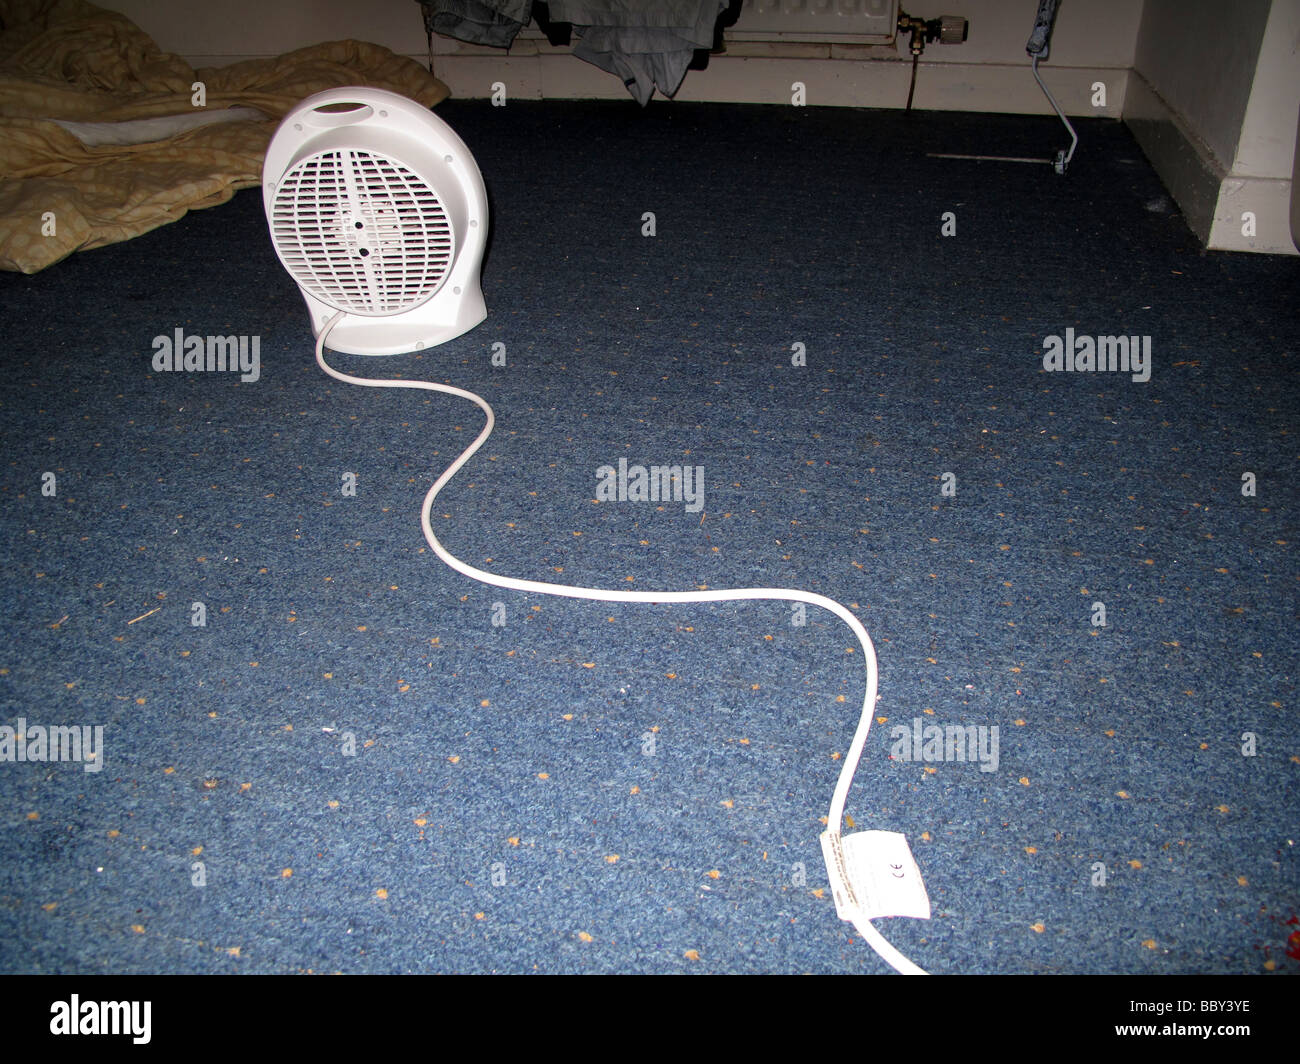 Portable lectric fan heater on floor with cable Stock Photo